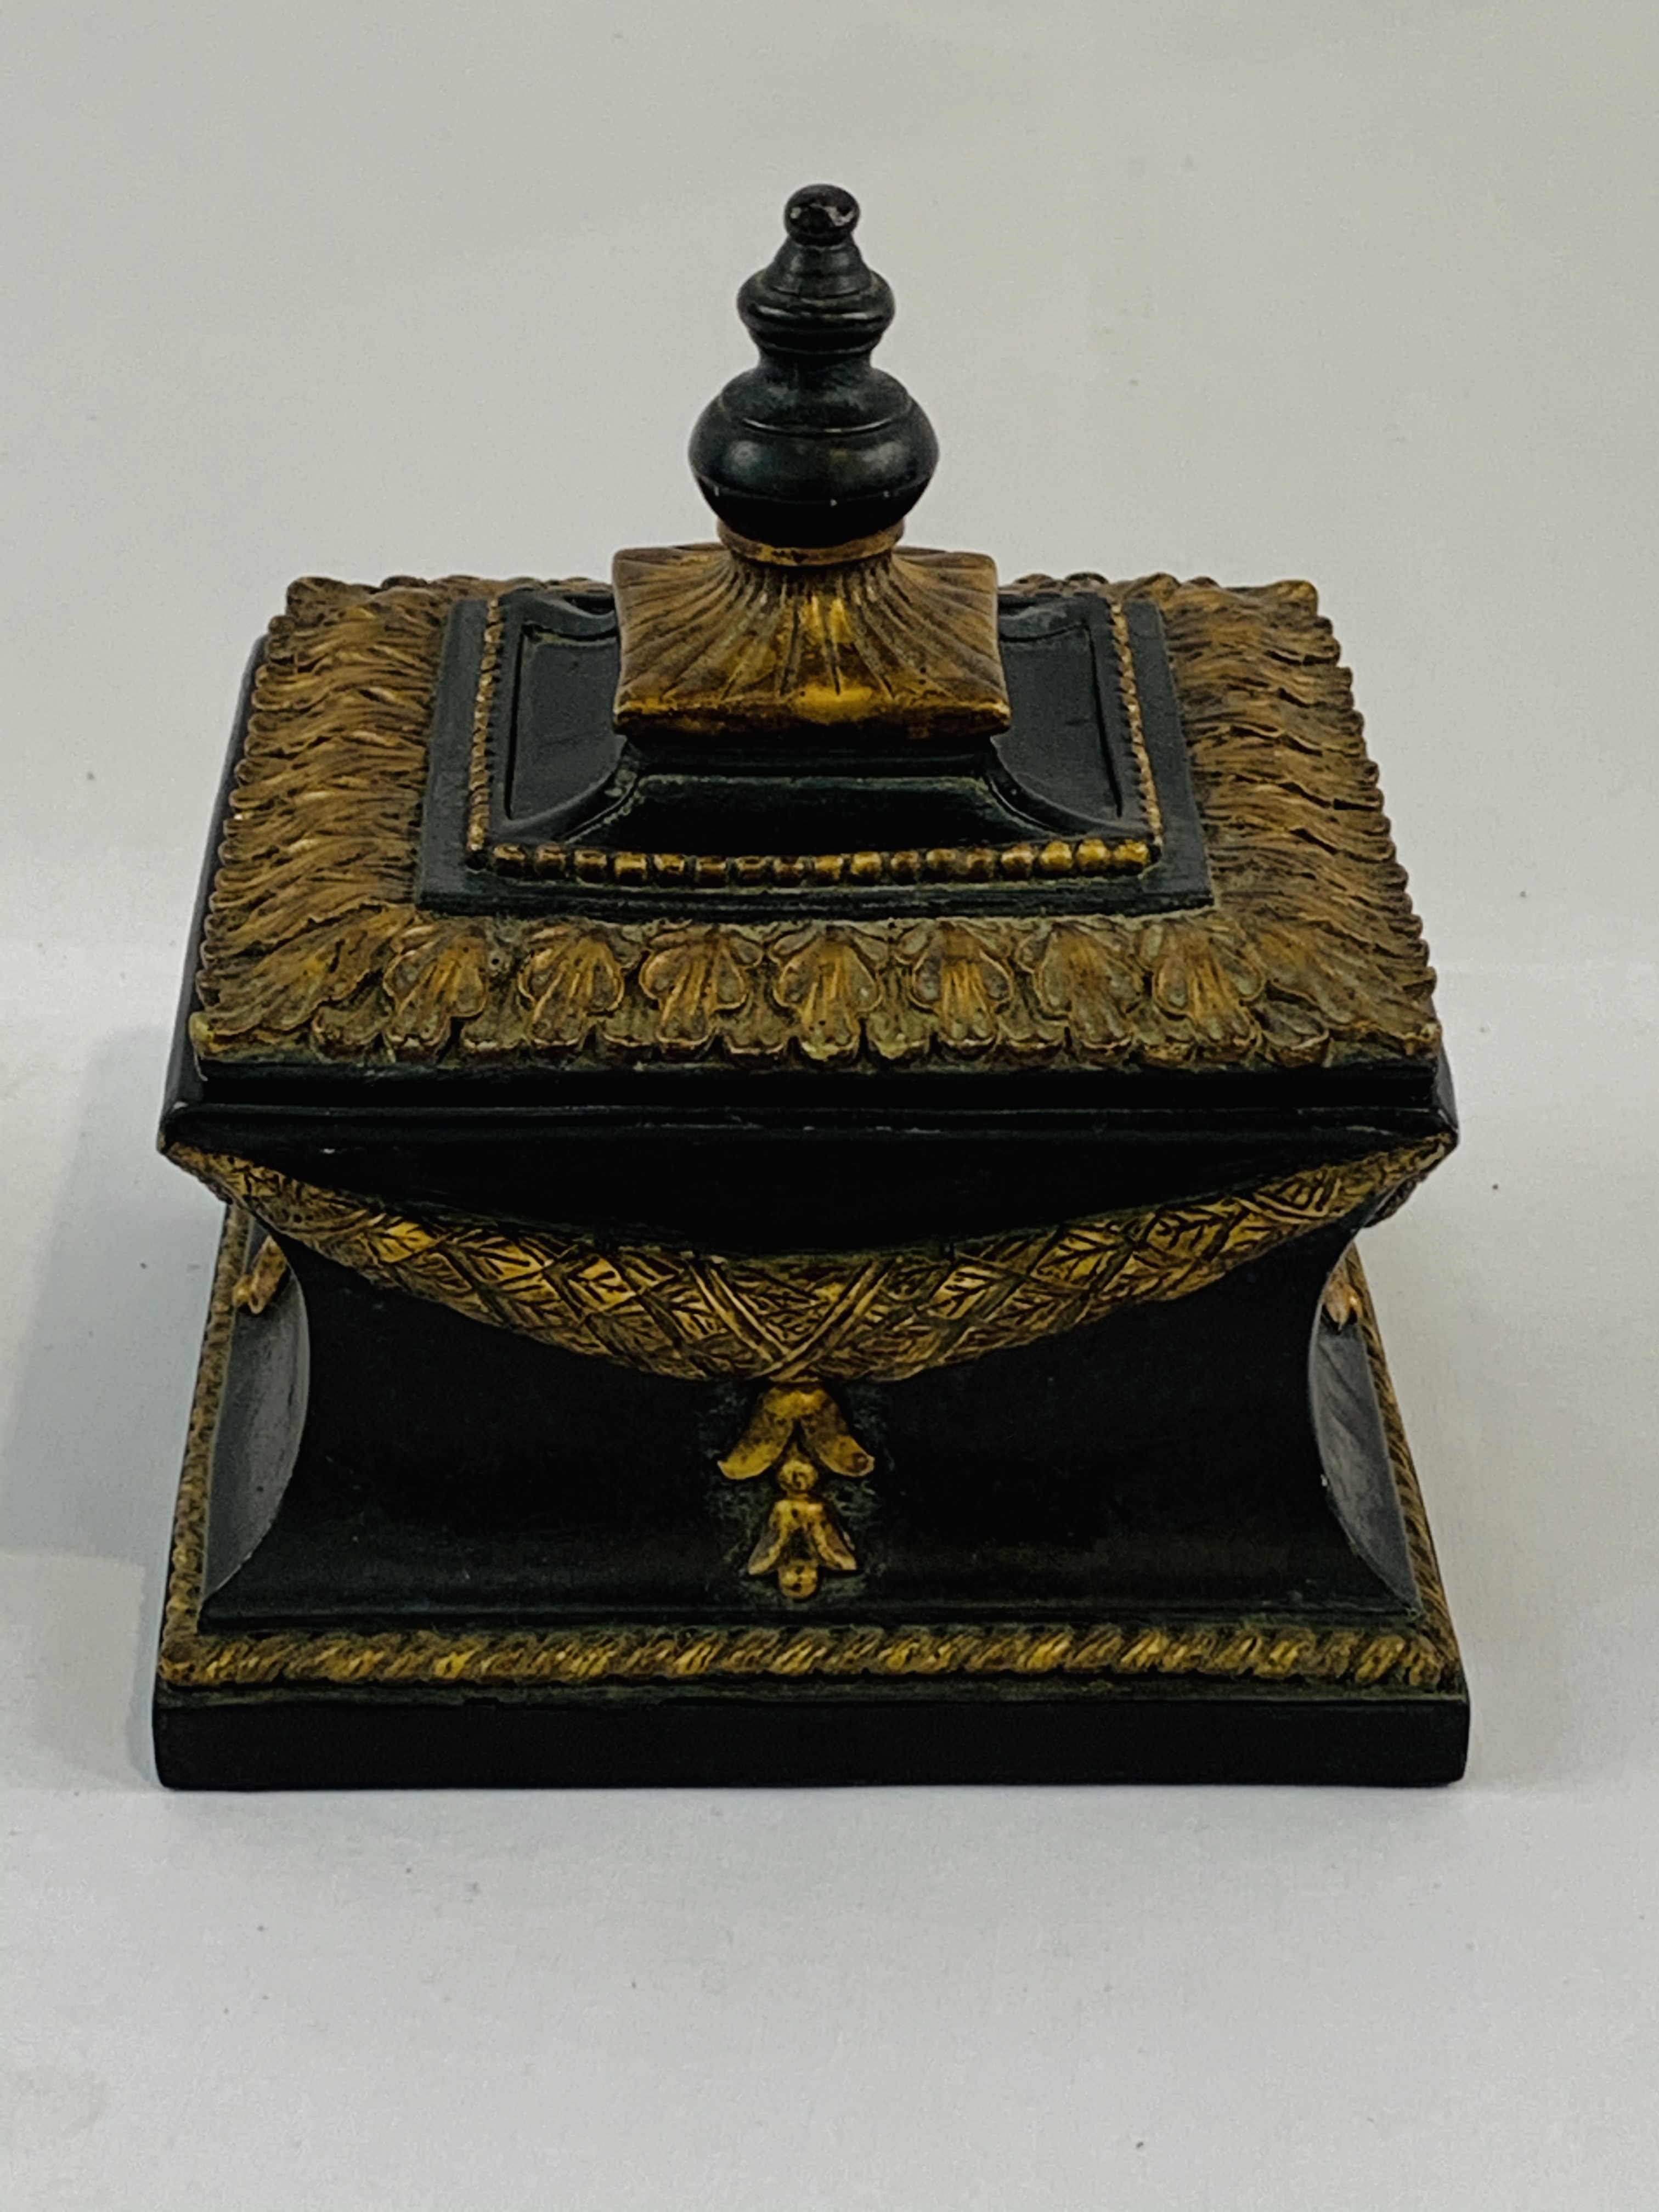 Vintage Baroque style gold and black trinket box with ormolu style rim. - Image 3 of 3